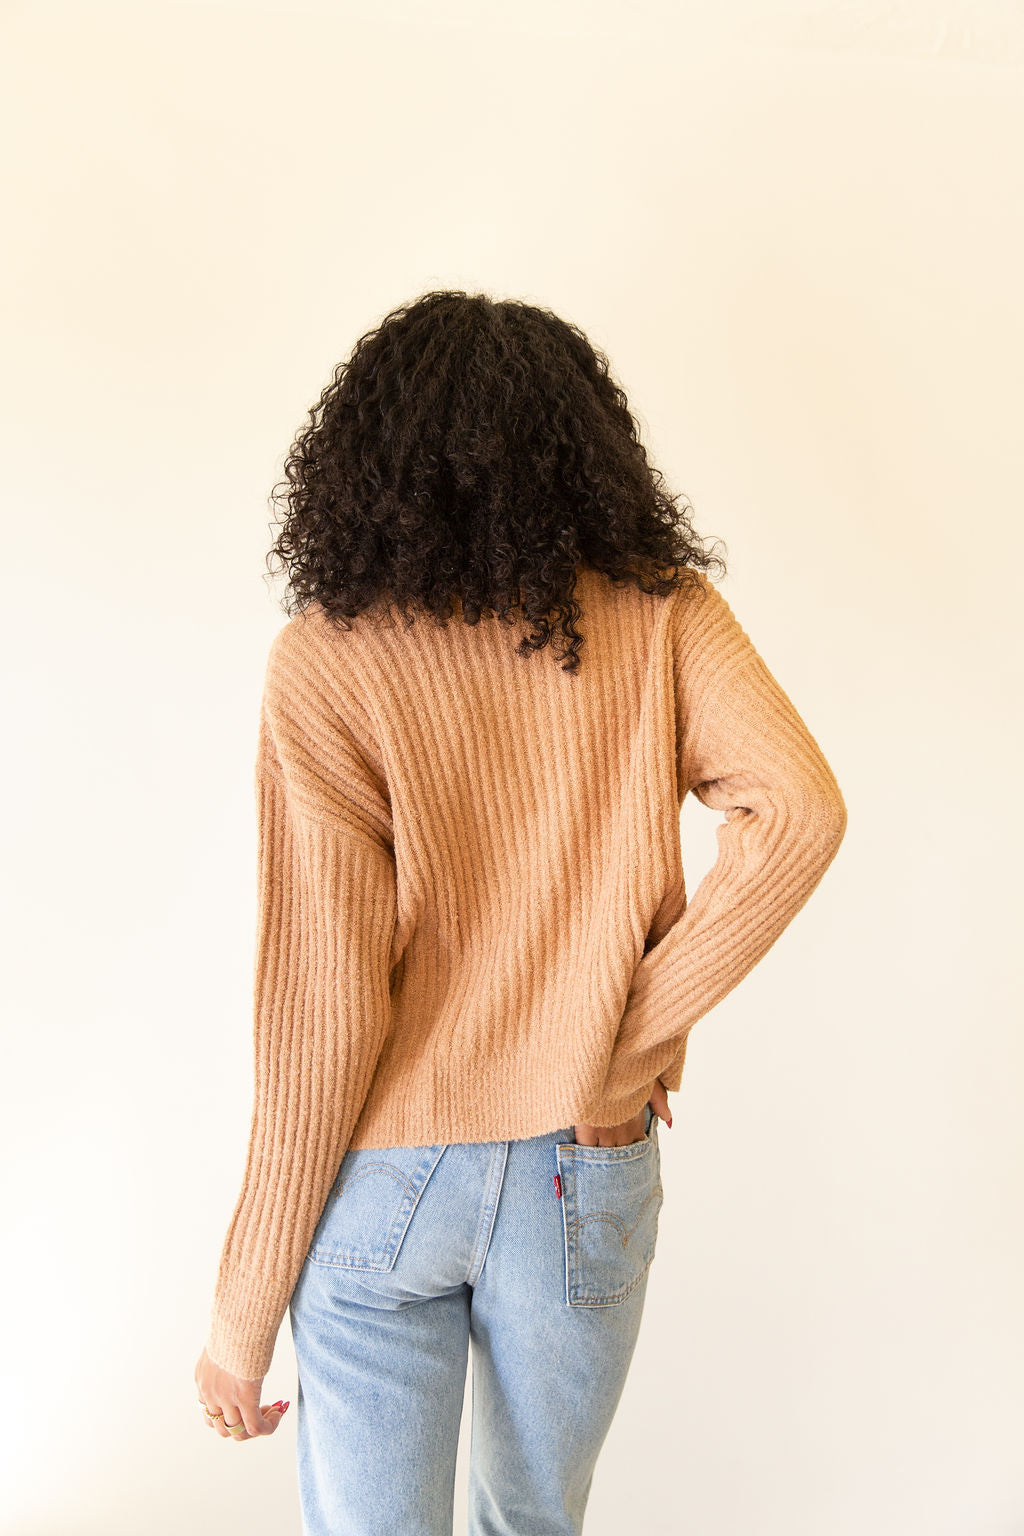 Hidden Roads Knit Cardigan by For Good